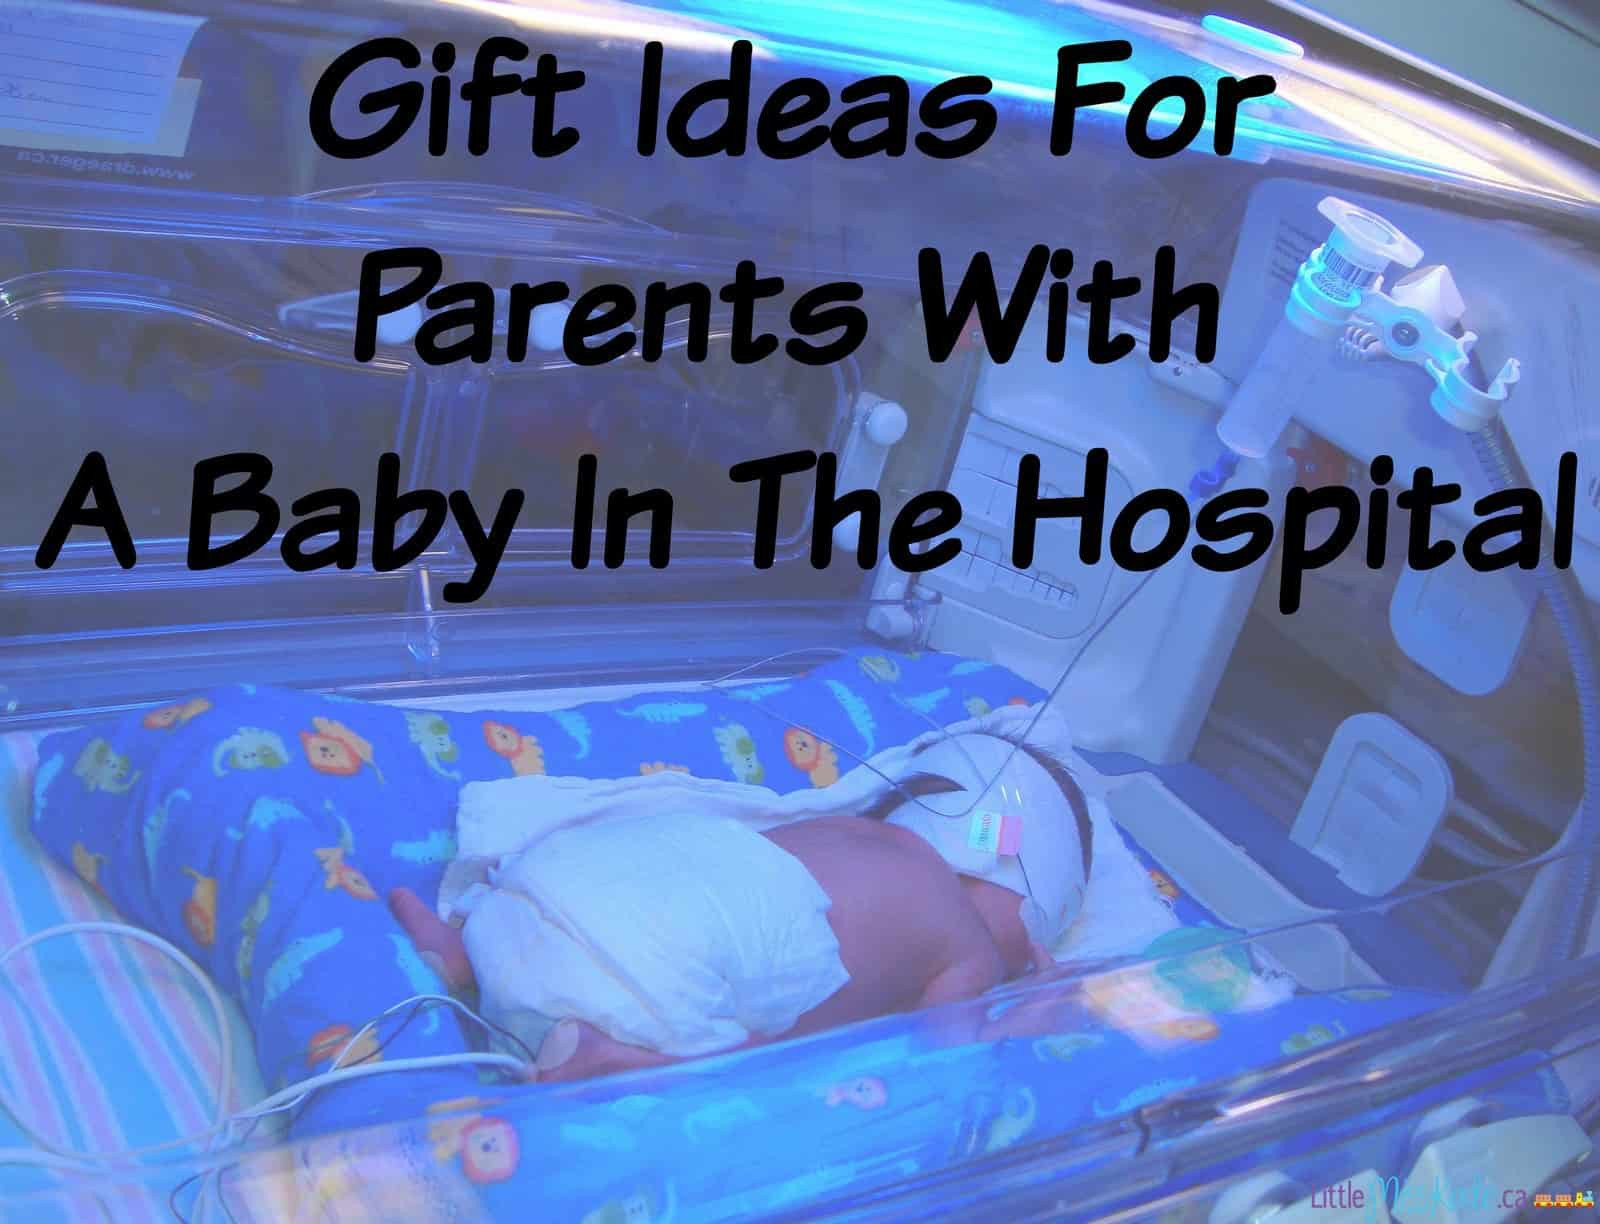 Newborn Baby Gift Ideas For Parents
 Gift Ideas For Parents With A Baby In The Hospital